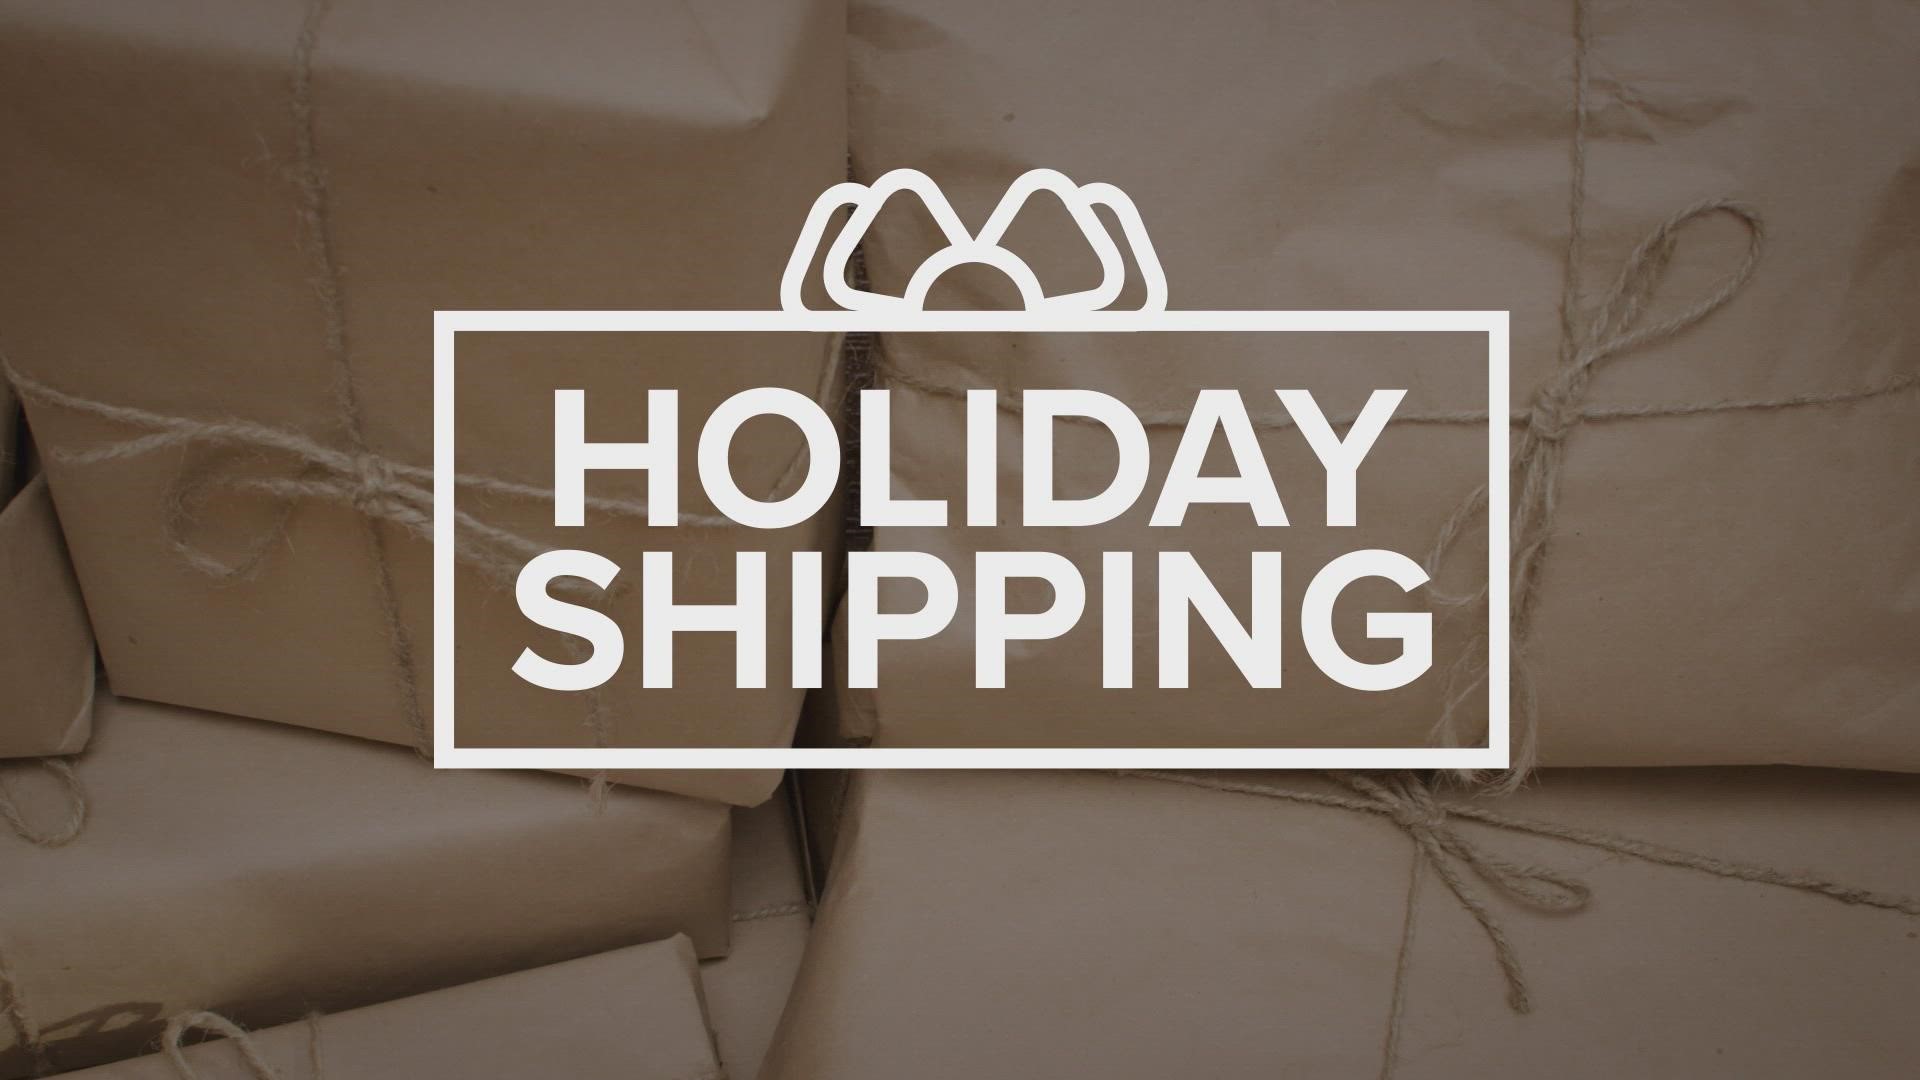 Some big shipping deadlines come this week if you want your gifts to arrive before Christmas.